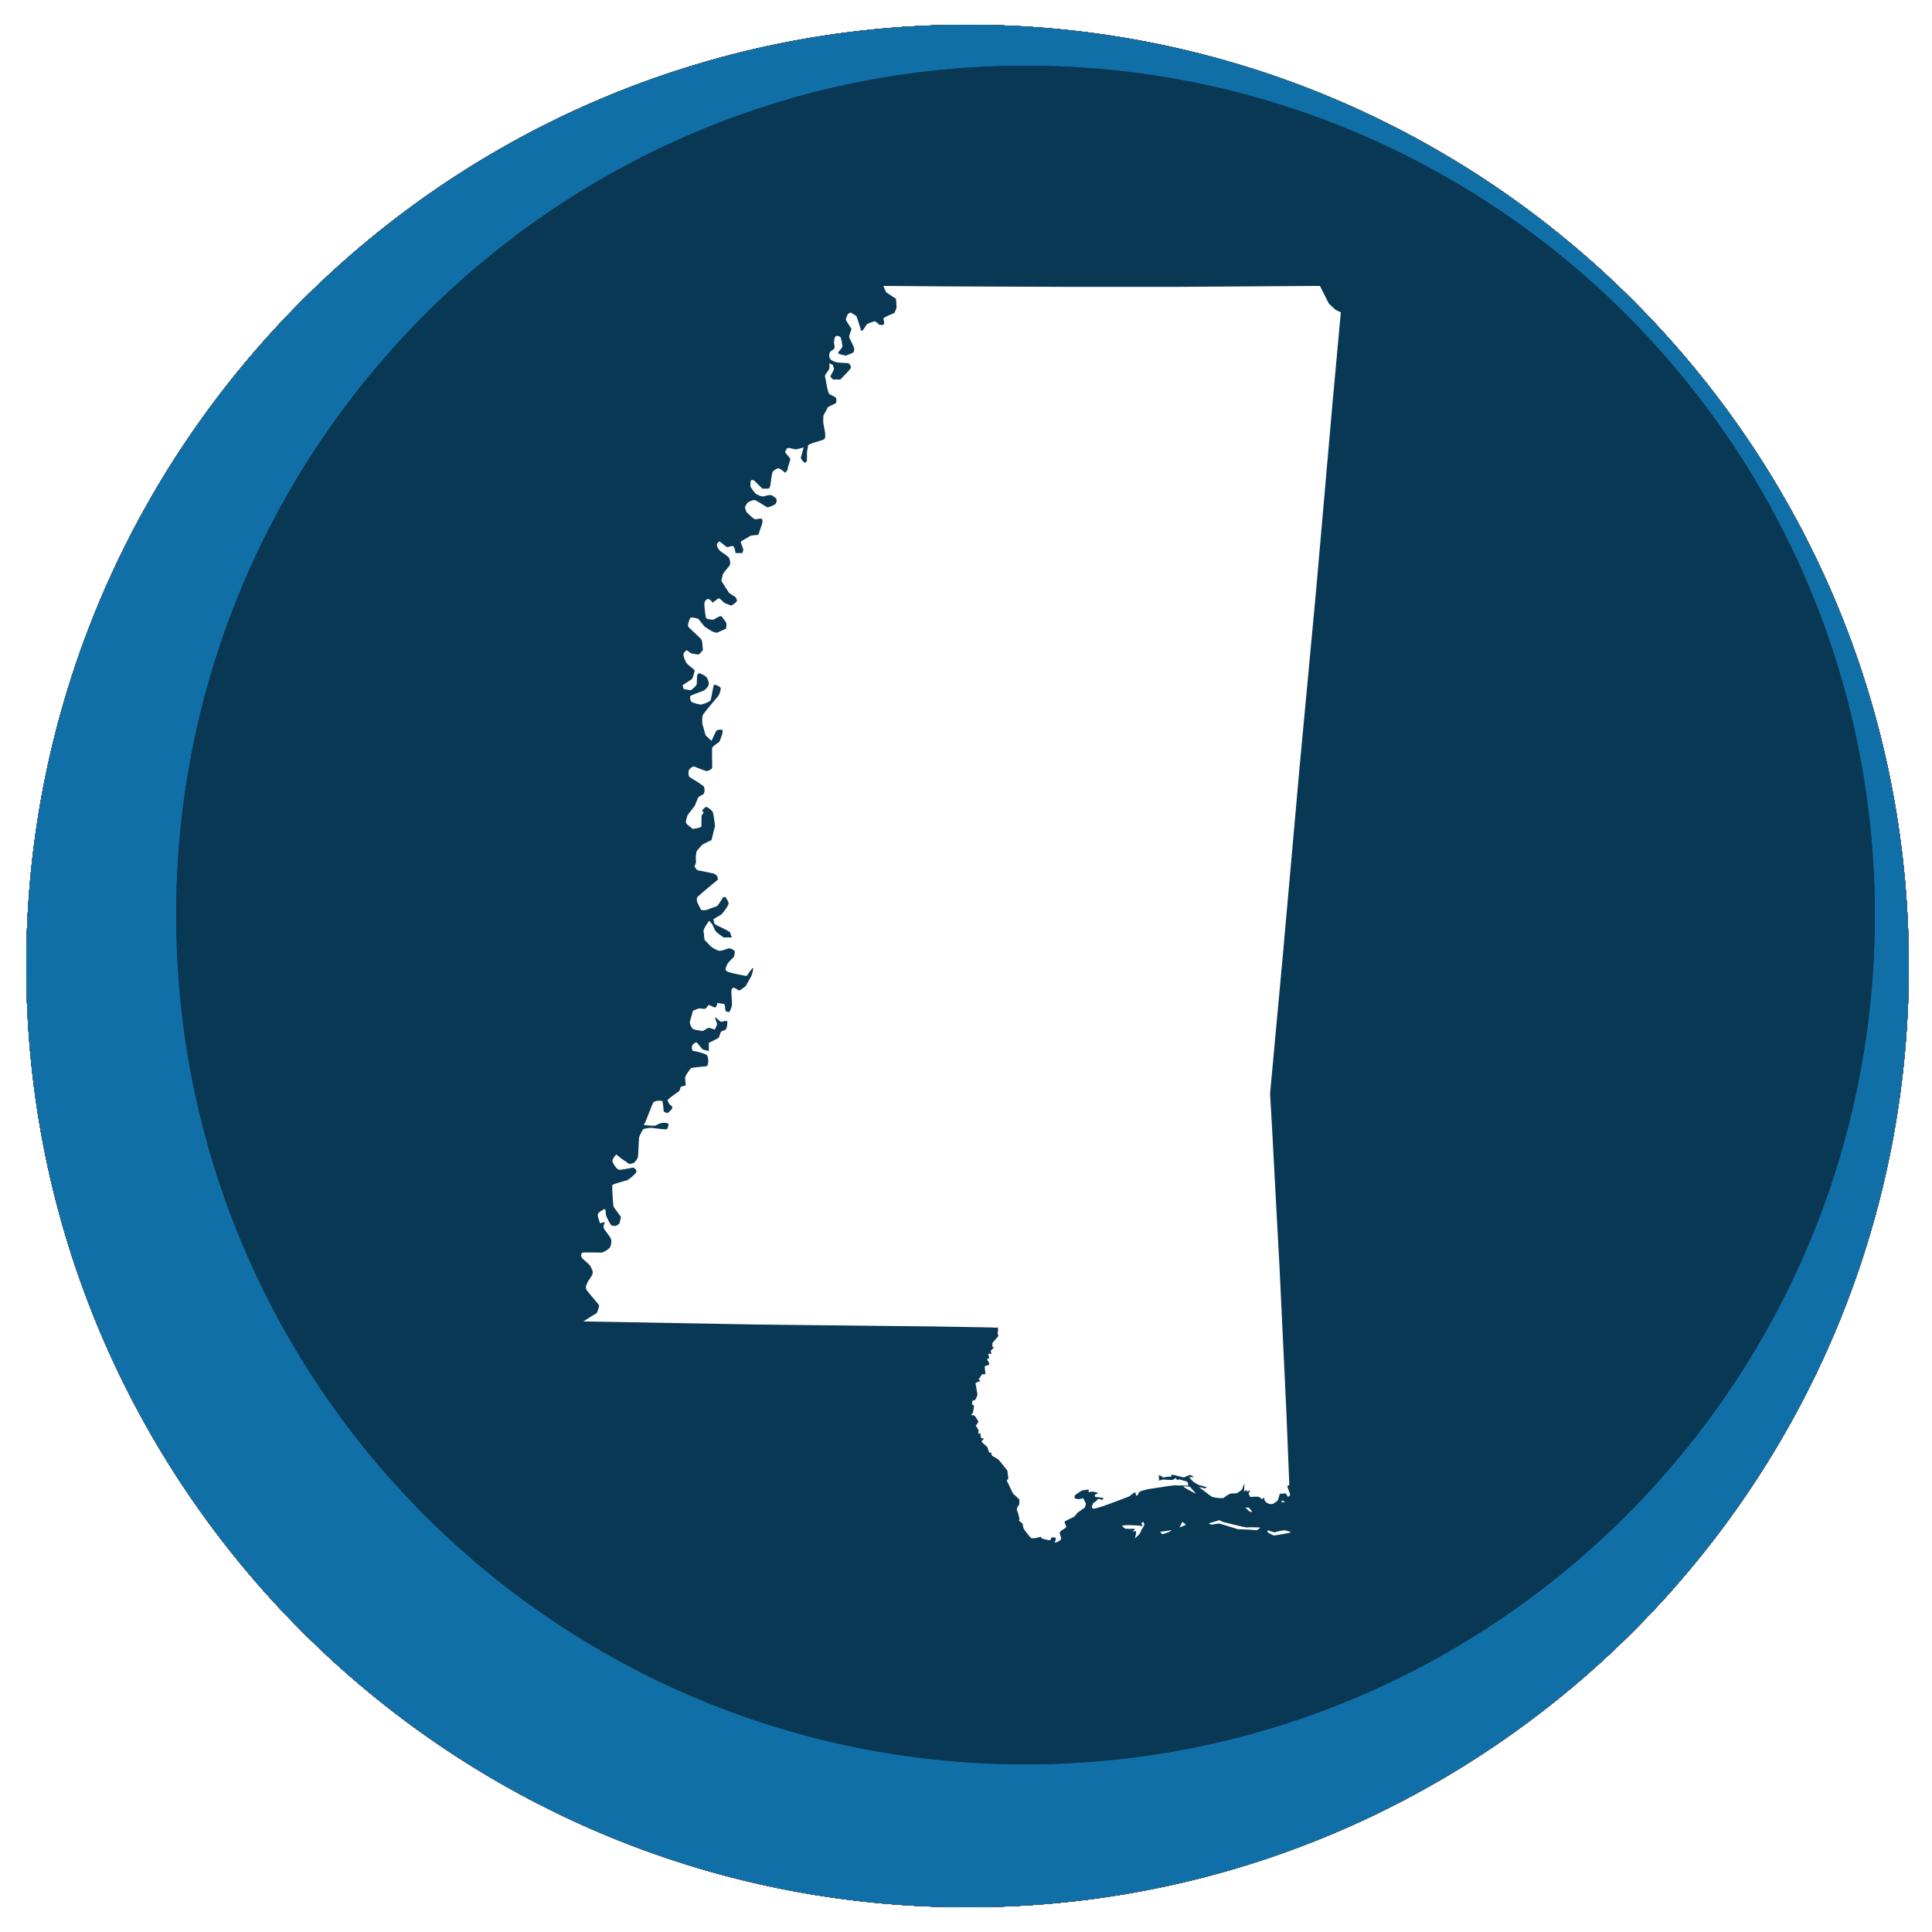 Mississippi state shape in a circle